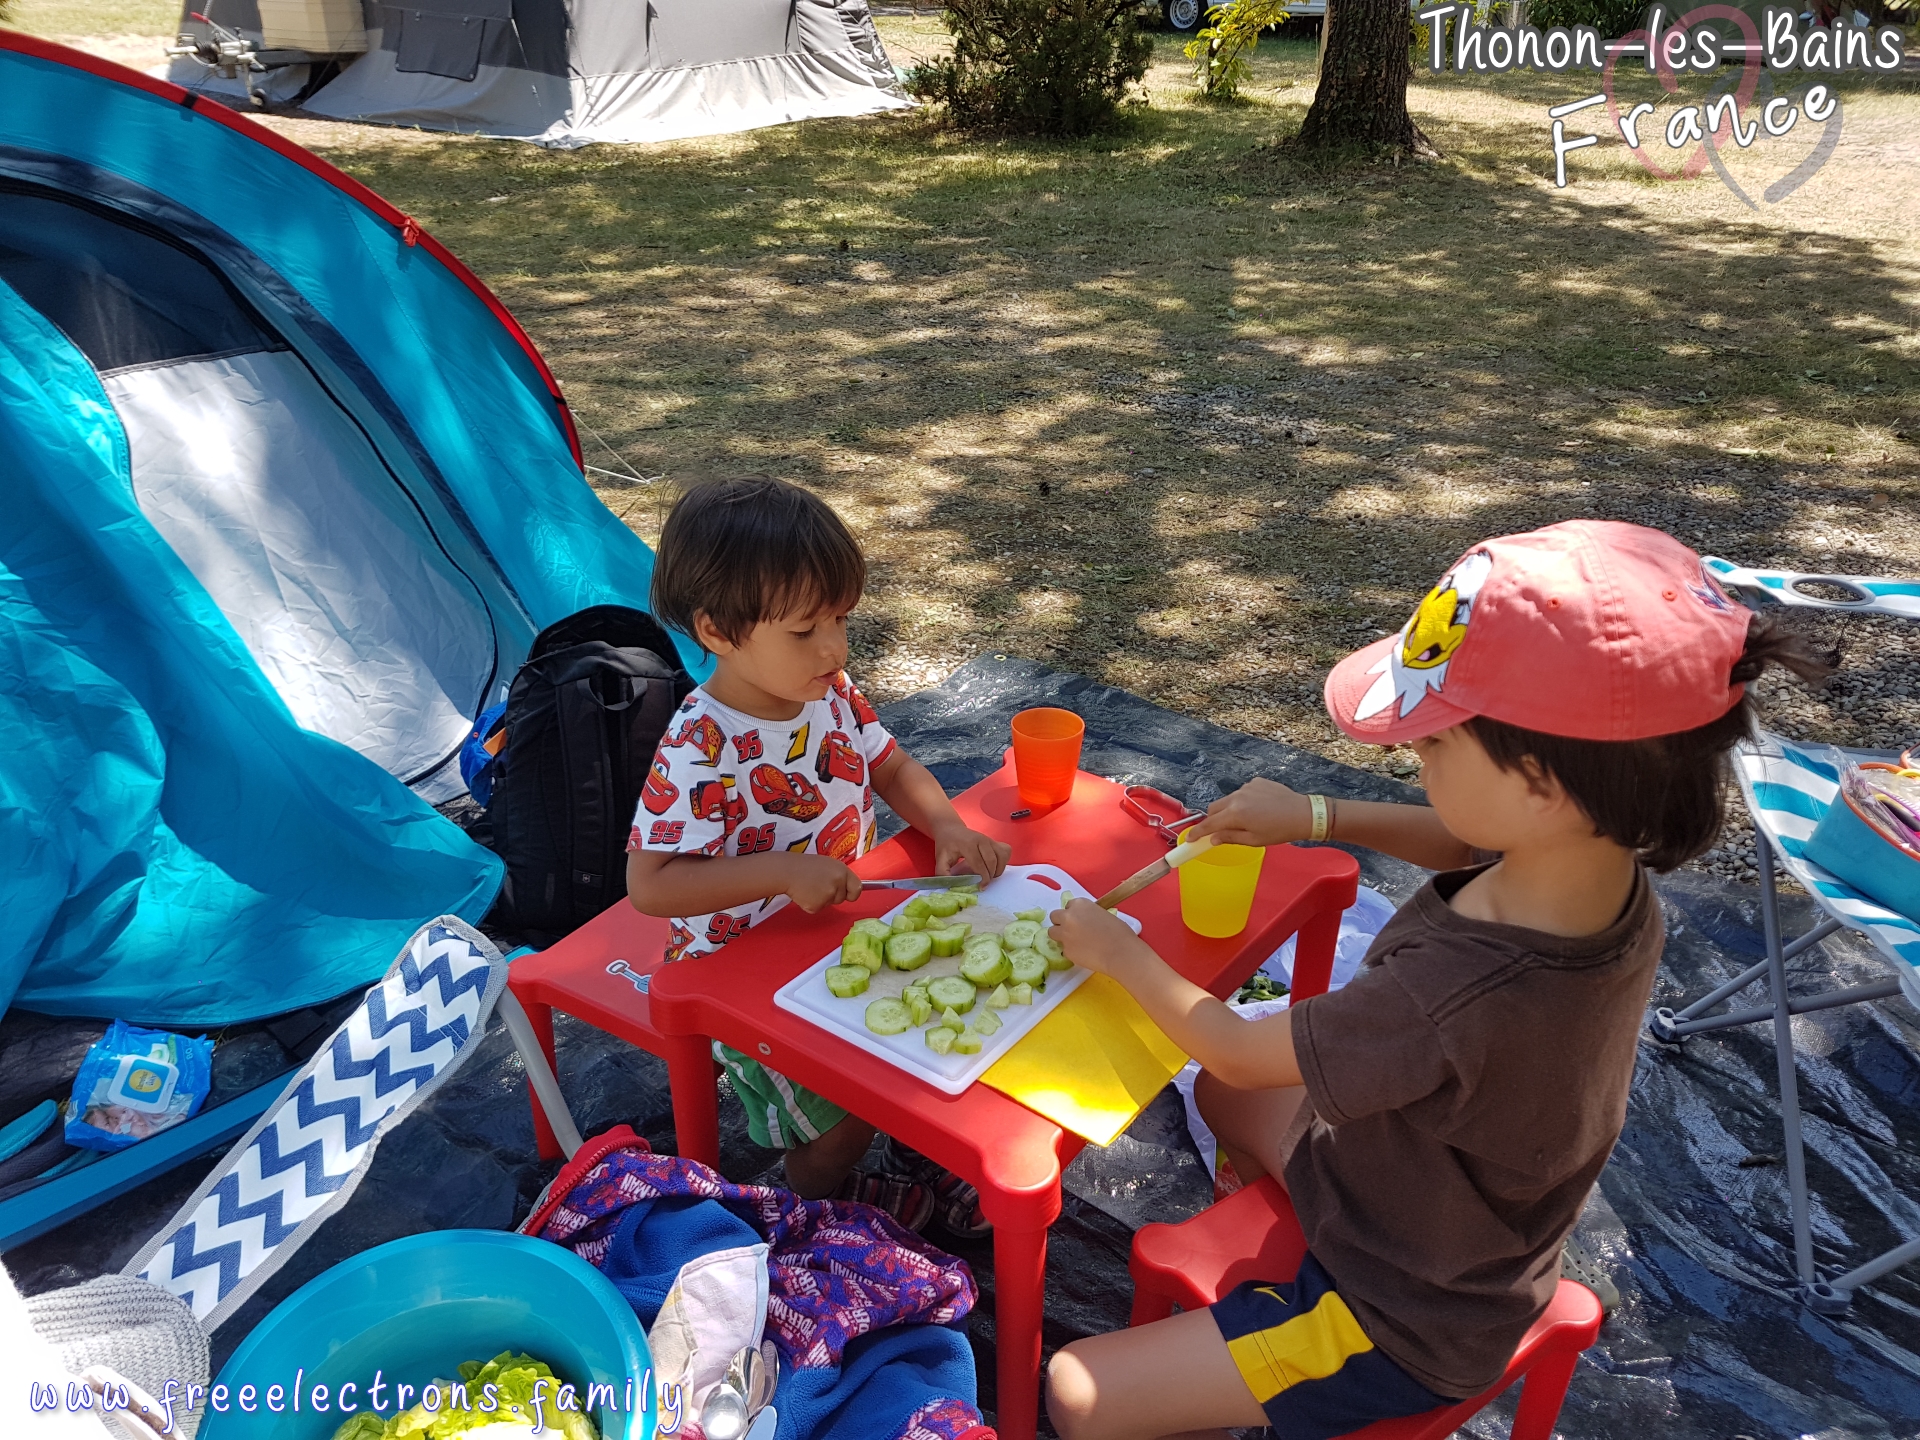 #FreeElectrons.Family - camping road trip Europe, Lake Geneva.

Two young kids at work, cutting cucumbers on a red toy table in front of a tent in a shaded camping site.

Text reads: Thonon-les-Bains France (with 2 opaque interlocking hearts behind the text) and www.freeelectrons.com.